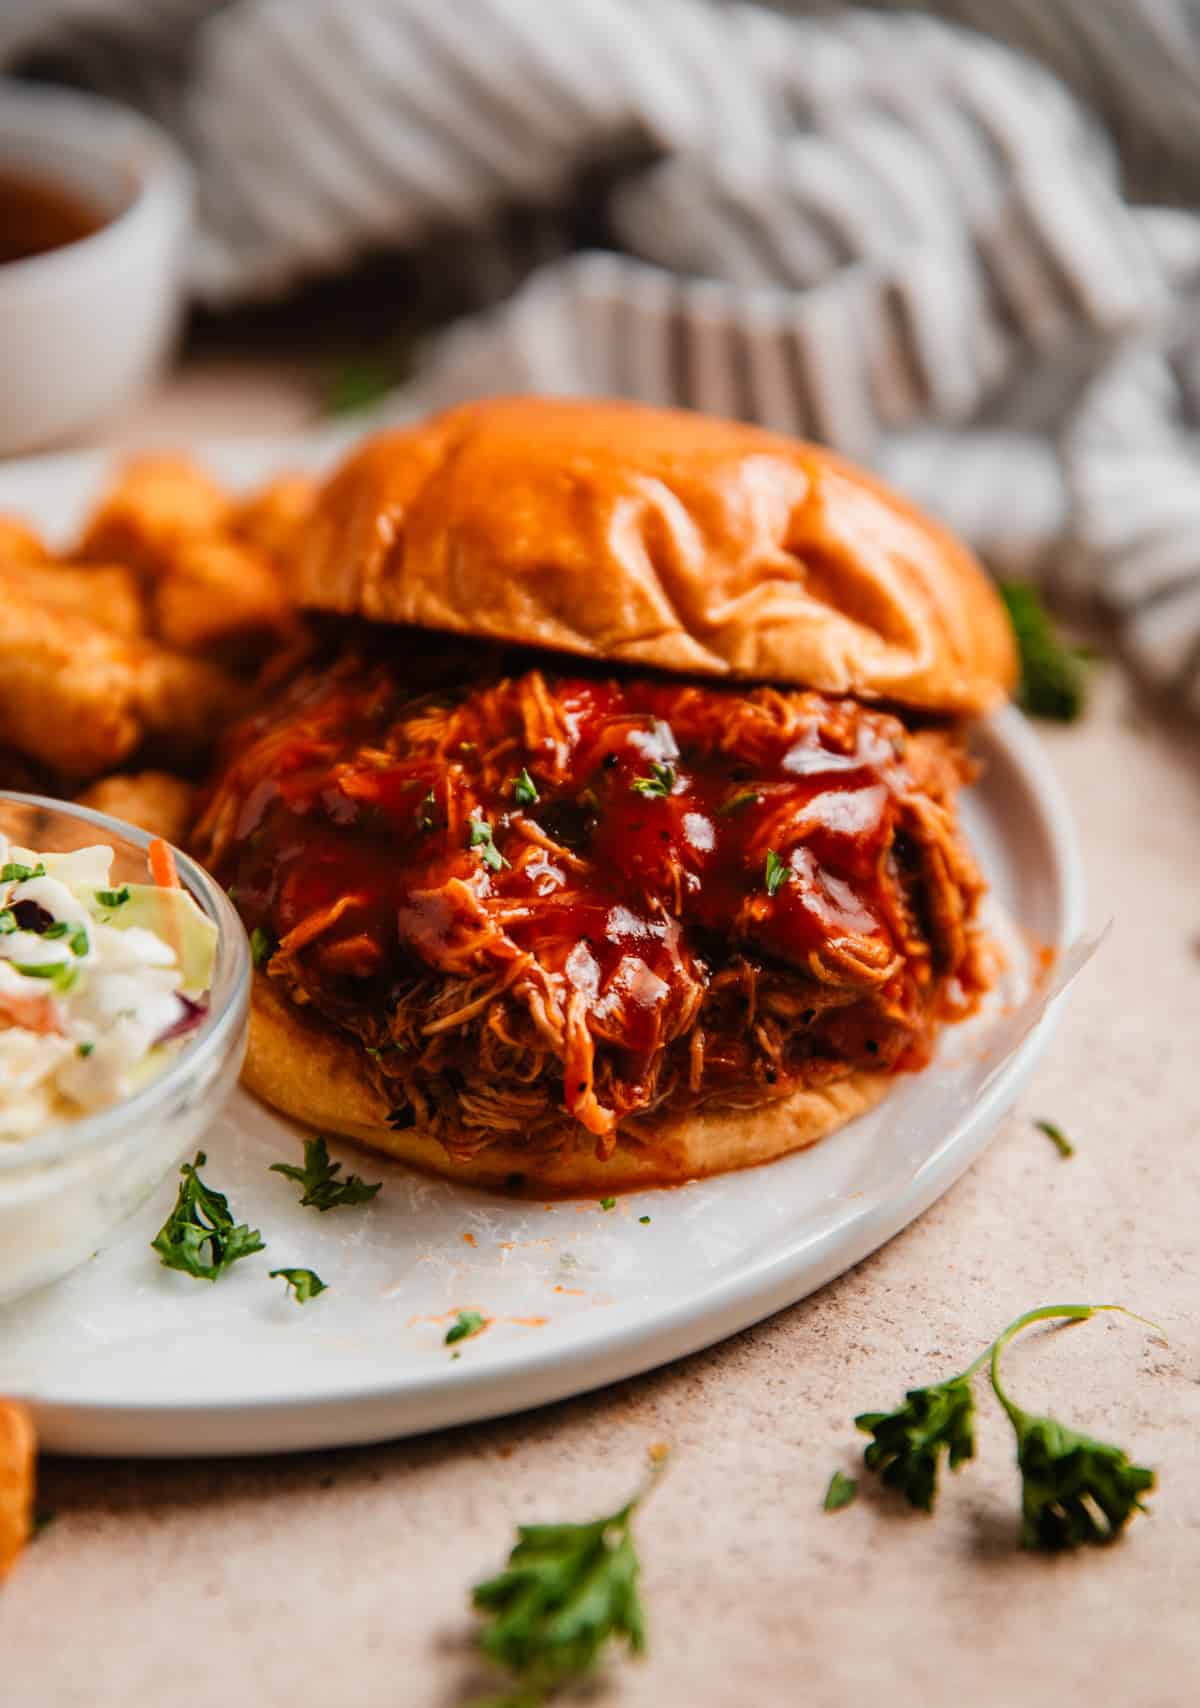 Pulled BBQ chicken sandwich on plate with cole slaw and tater tots.